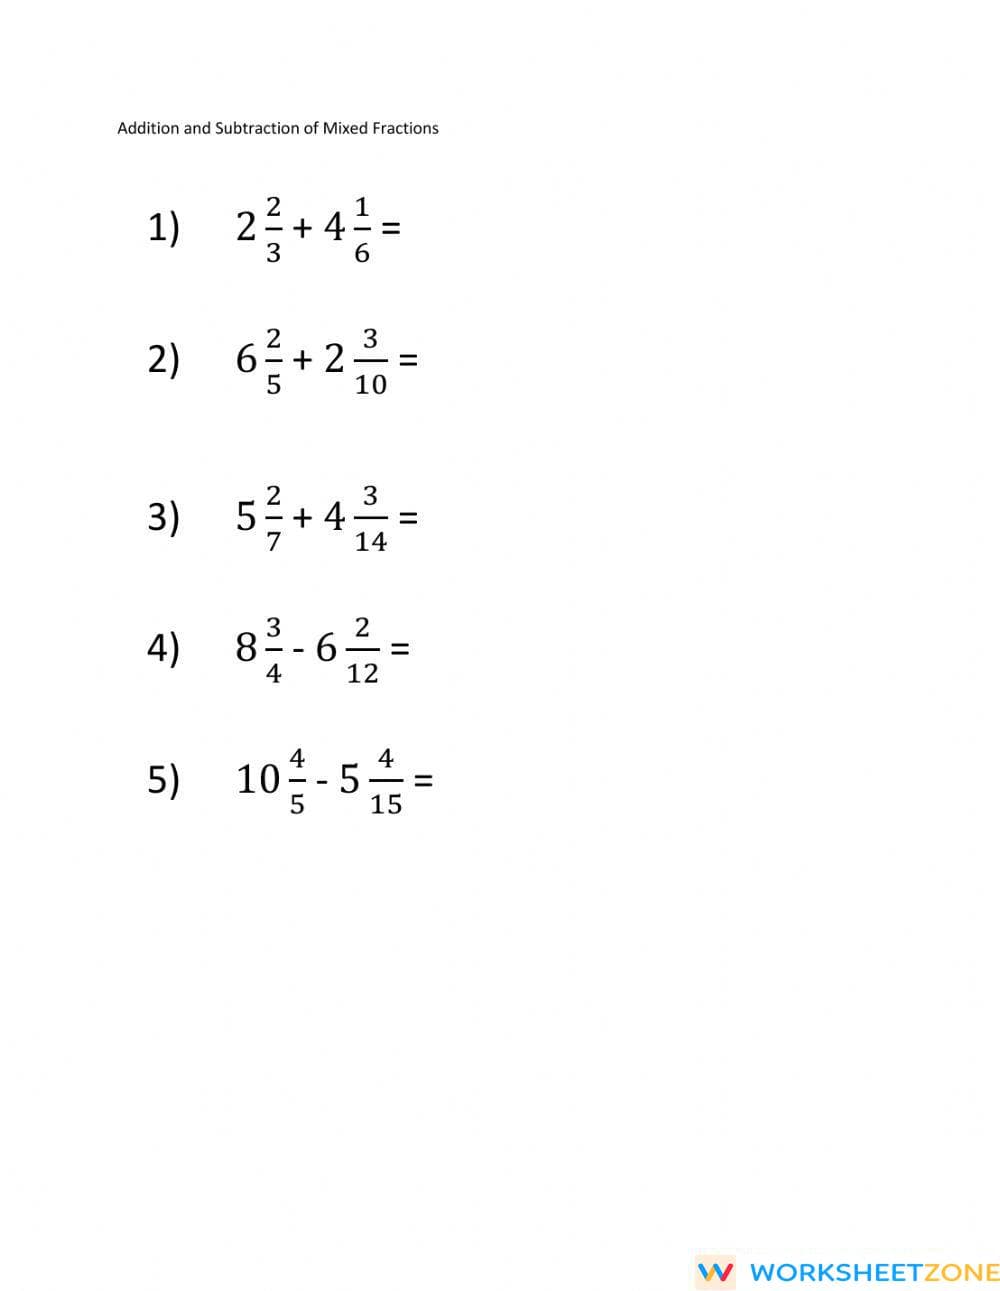 Addition and subtraction of mixed fractions